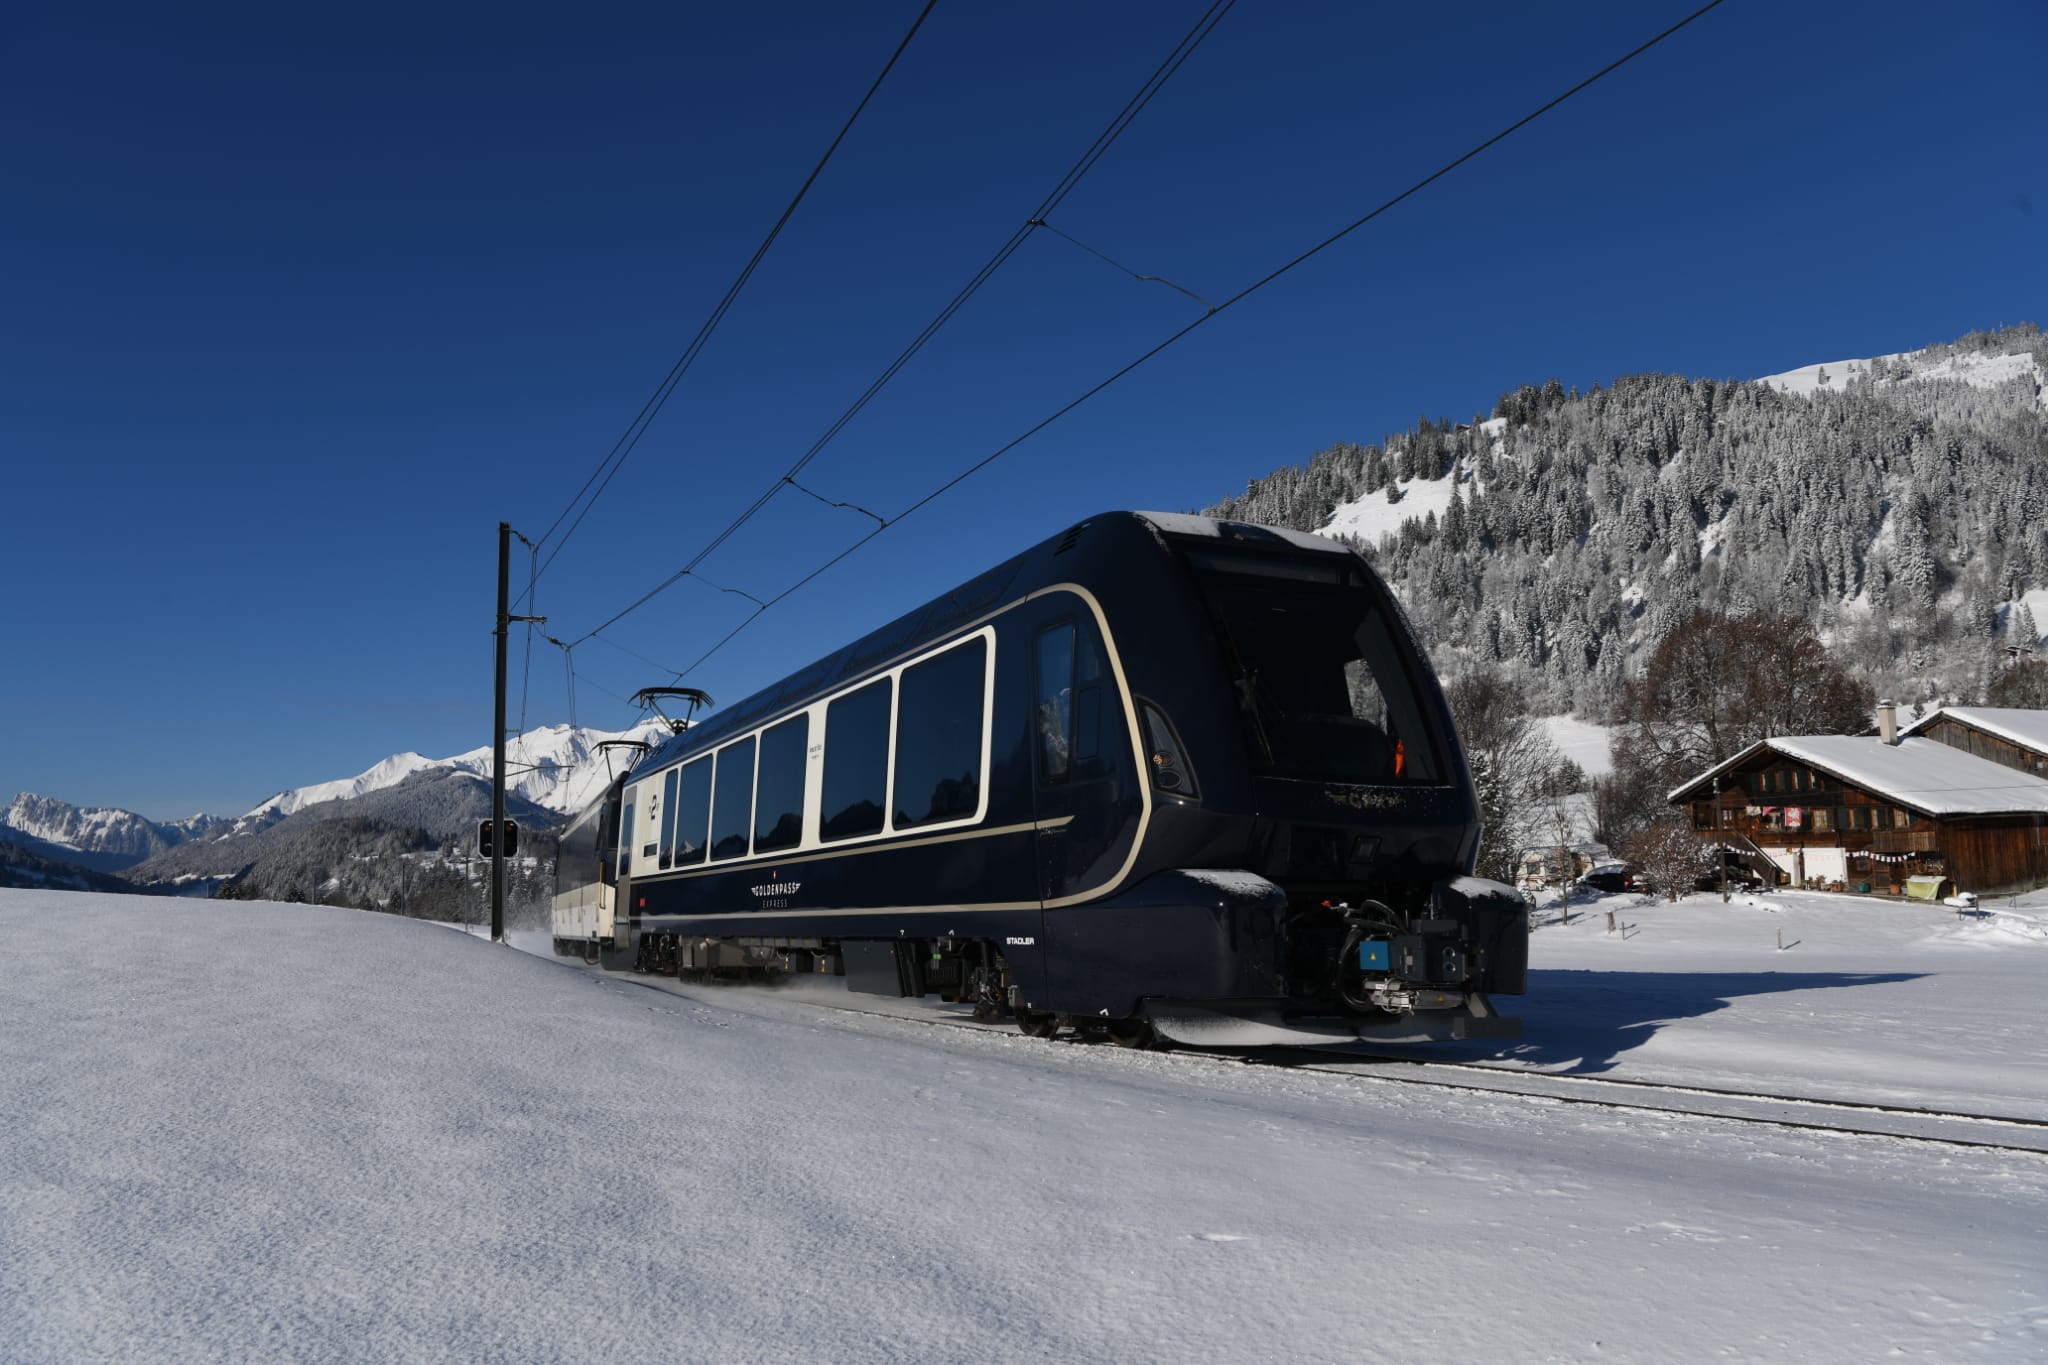 Swiss train innovation hits a major milestone with track-jumping cars